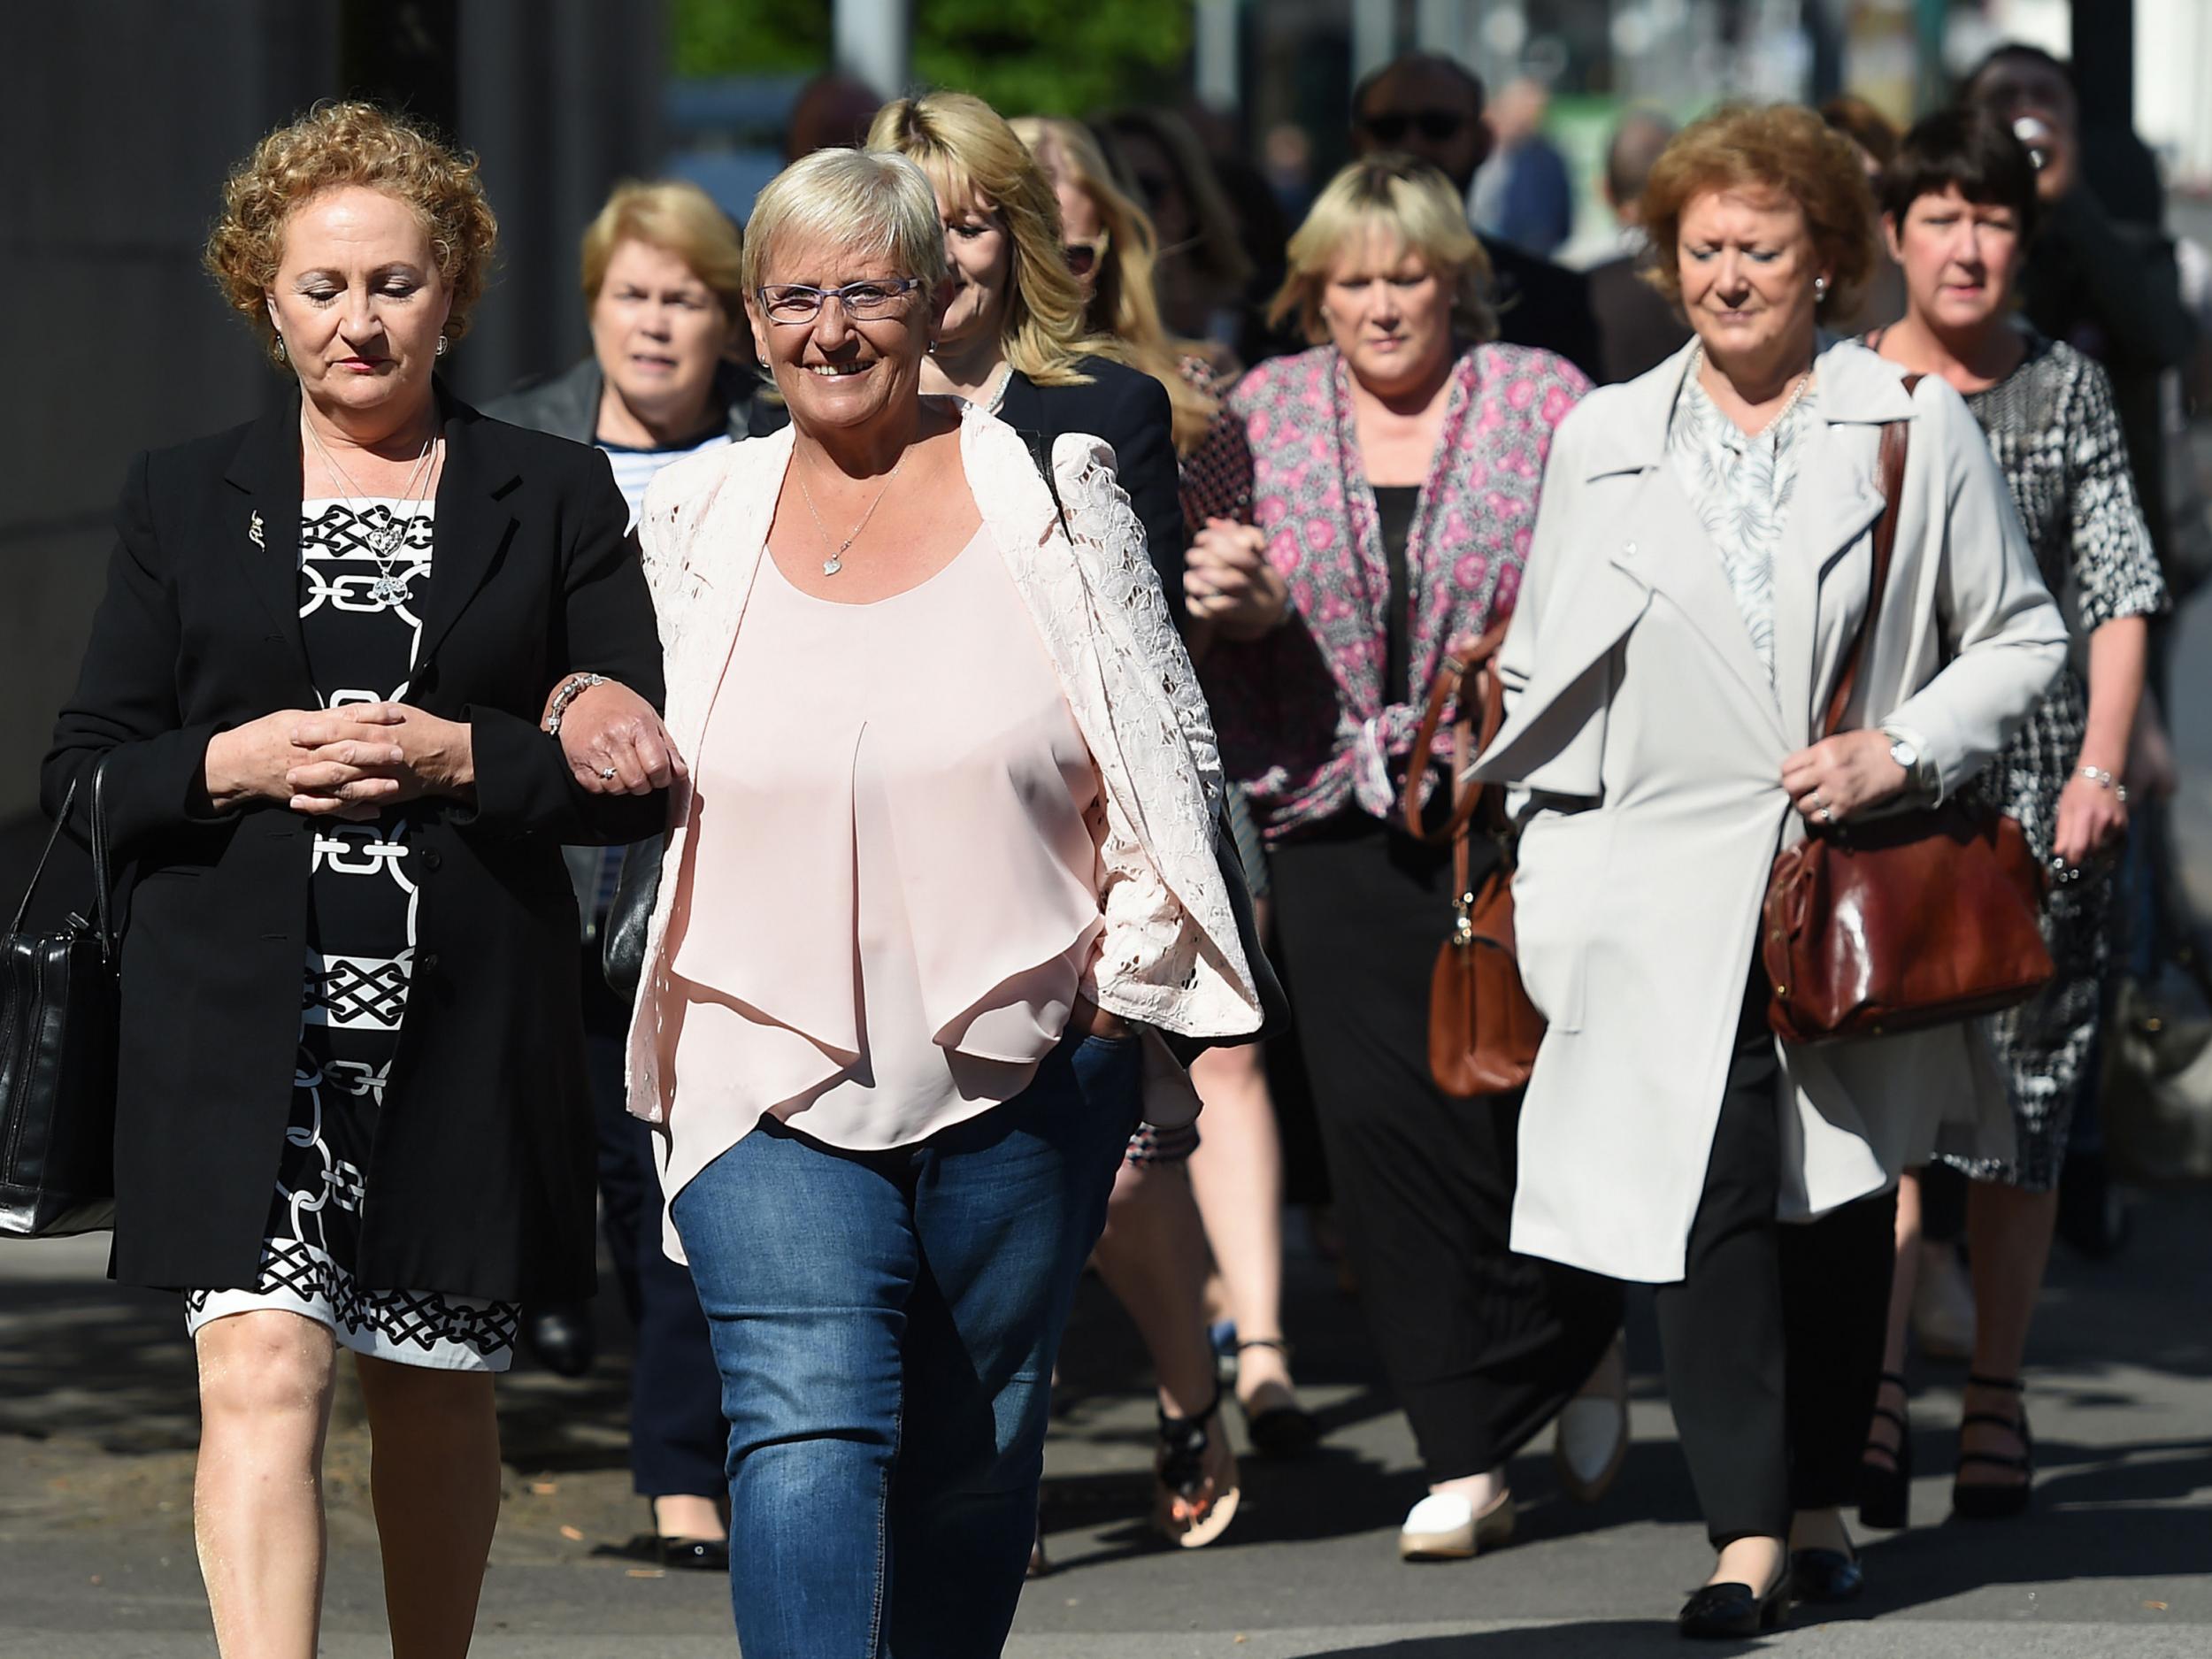 Judith Conduit (second from left) arrives with other victims at Nottingham Crown Court where Ian Paterson, a surgeon convicted of carrying out a series of needless breast operations, was sentenced (Press Association)